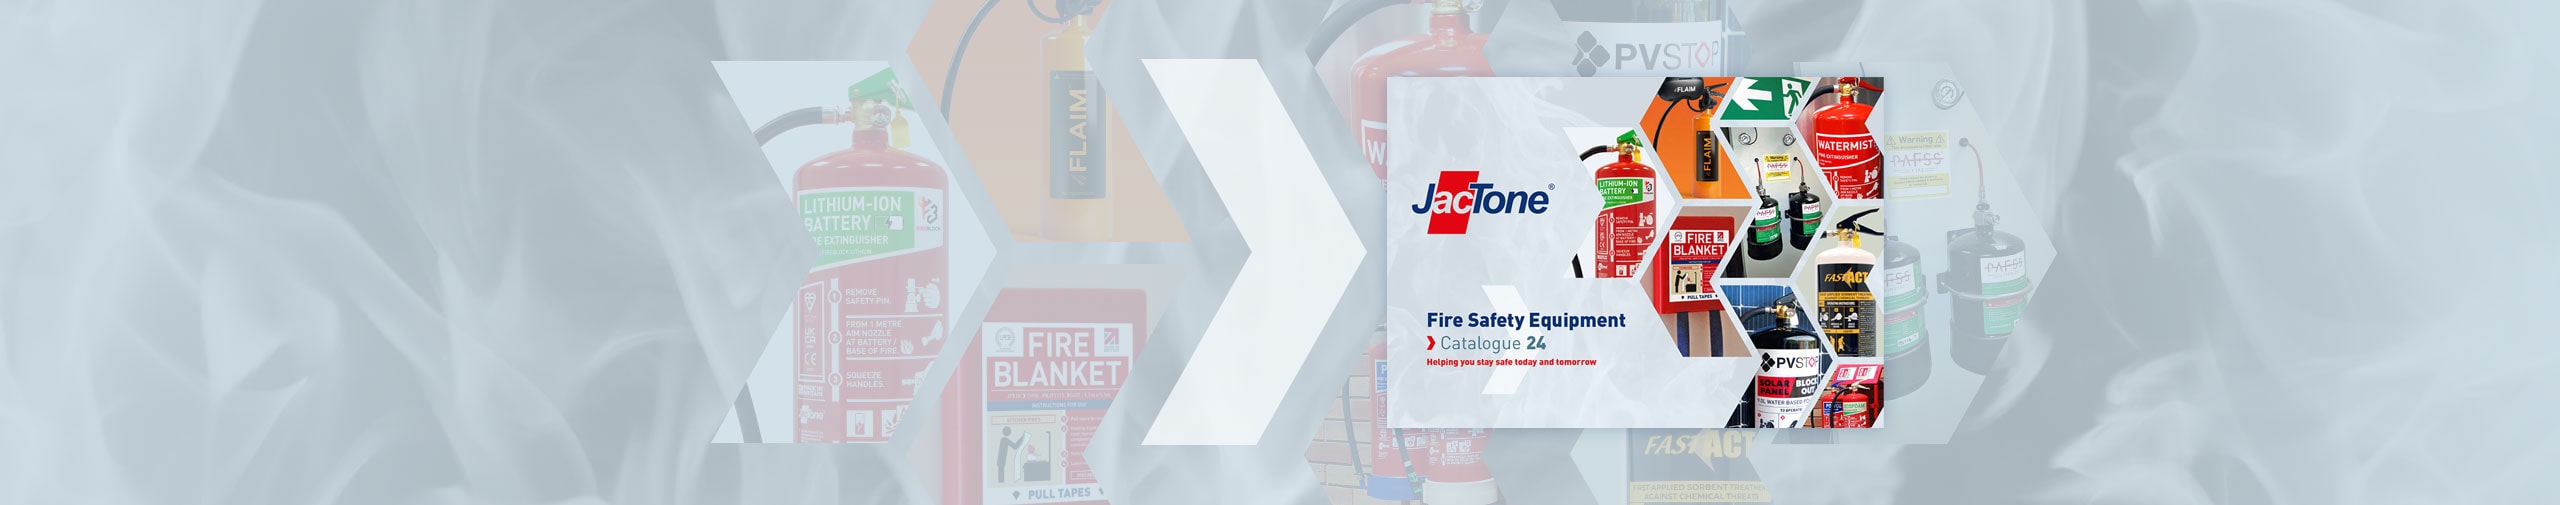 Jactone Fire Safety Equipment Catalogue 24